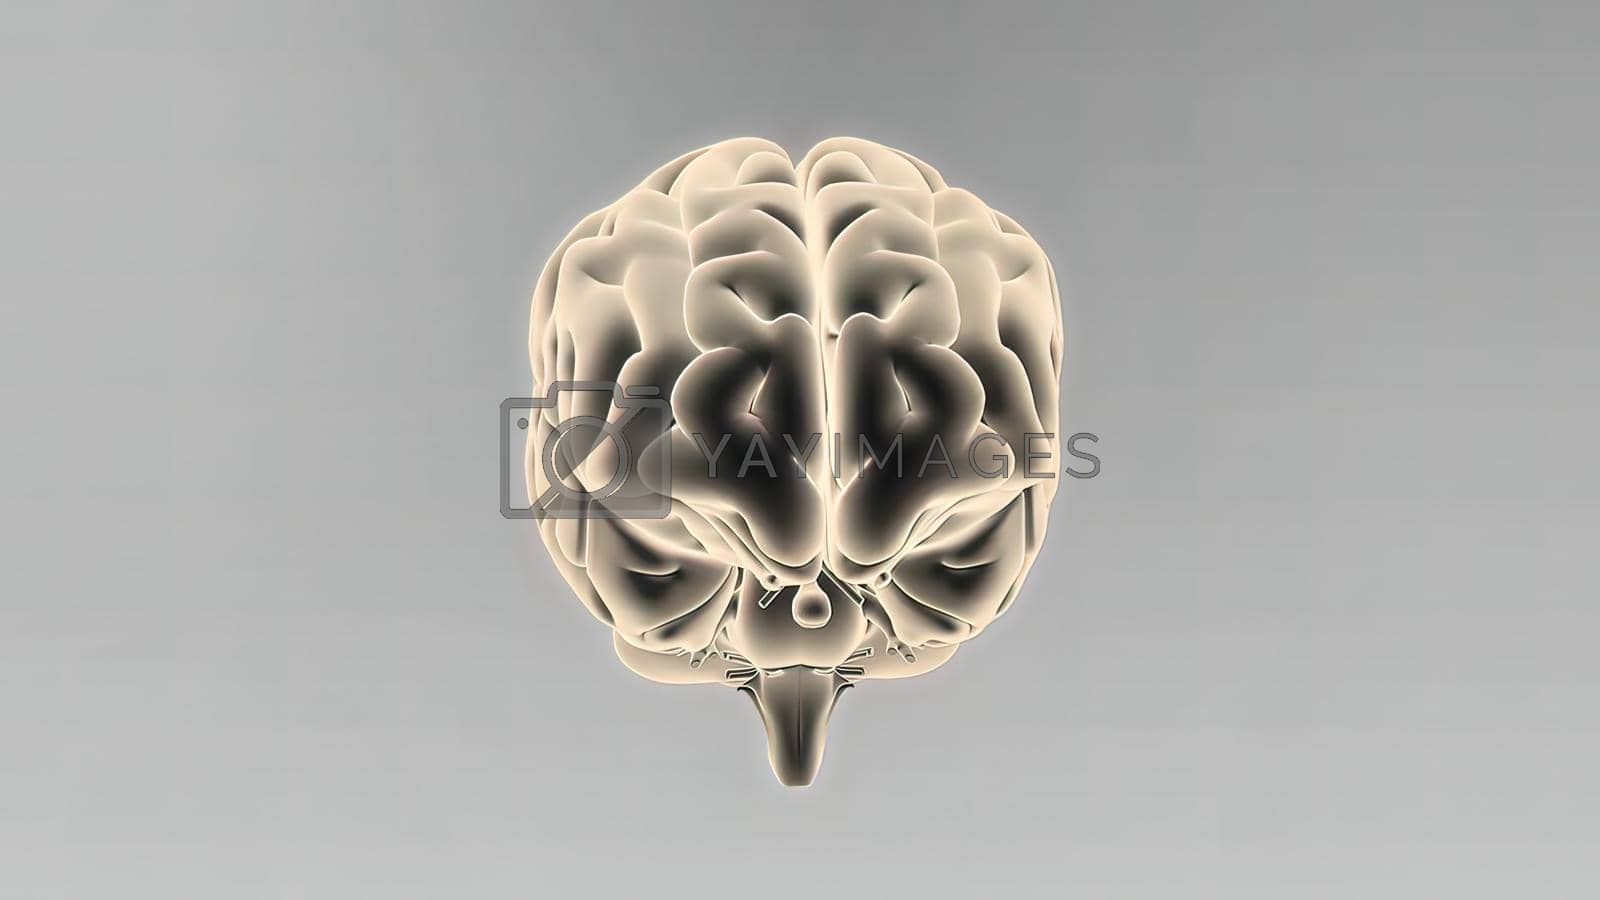 Royalty free image of Medical 3D illustration of human brain by creativepic